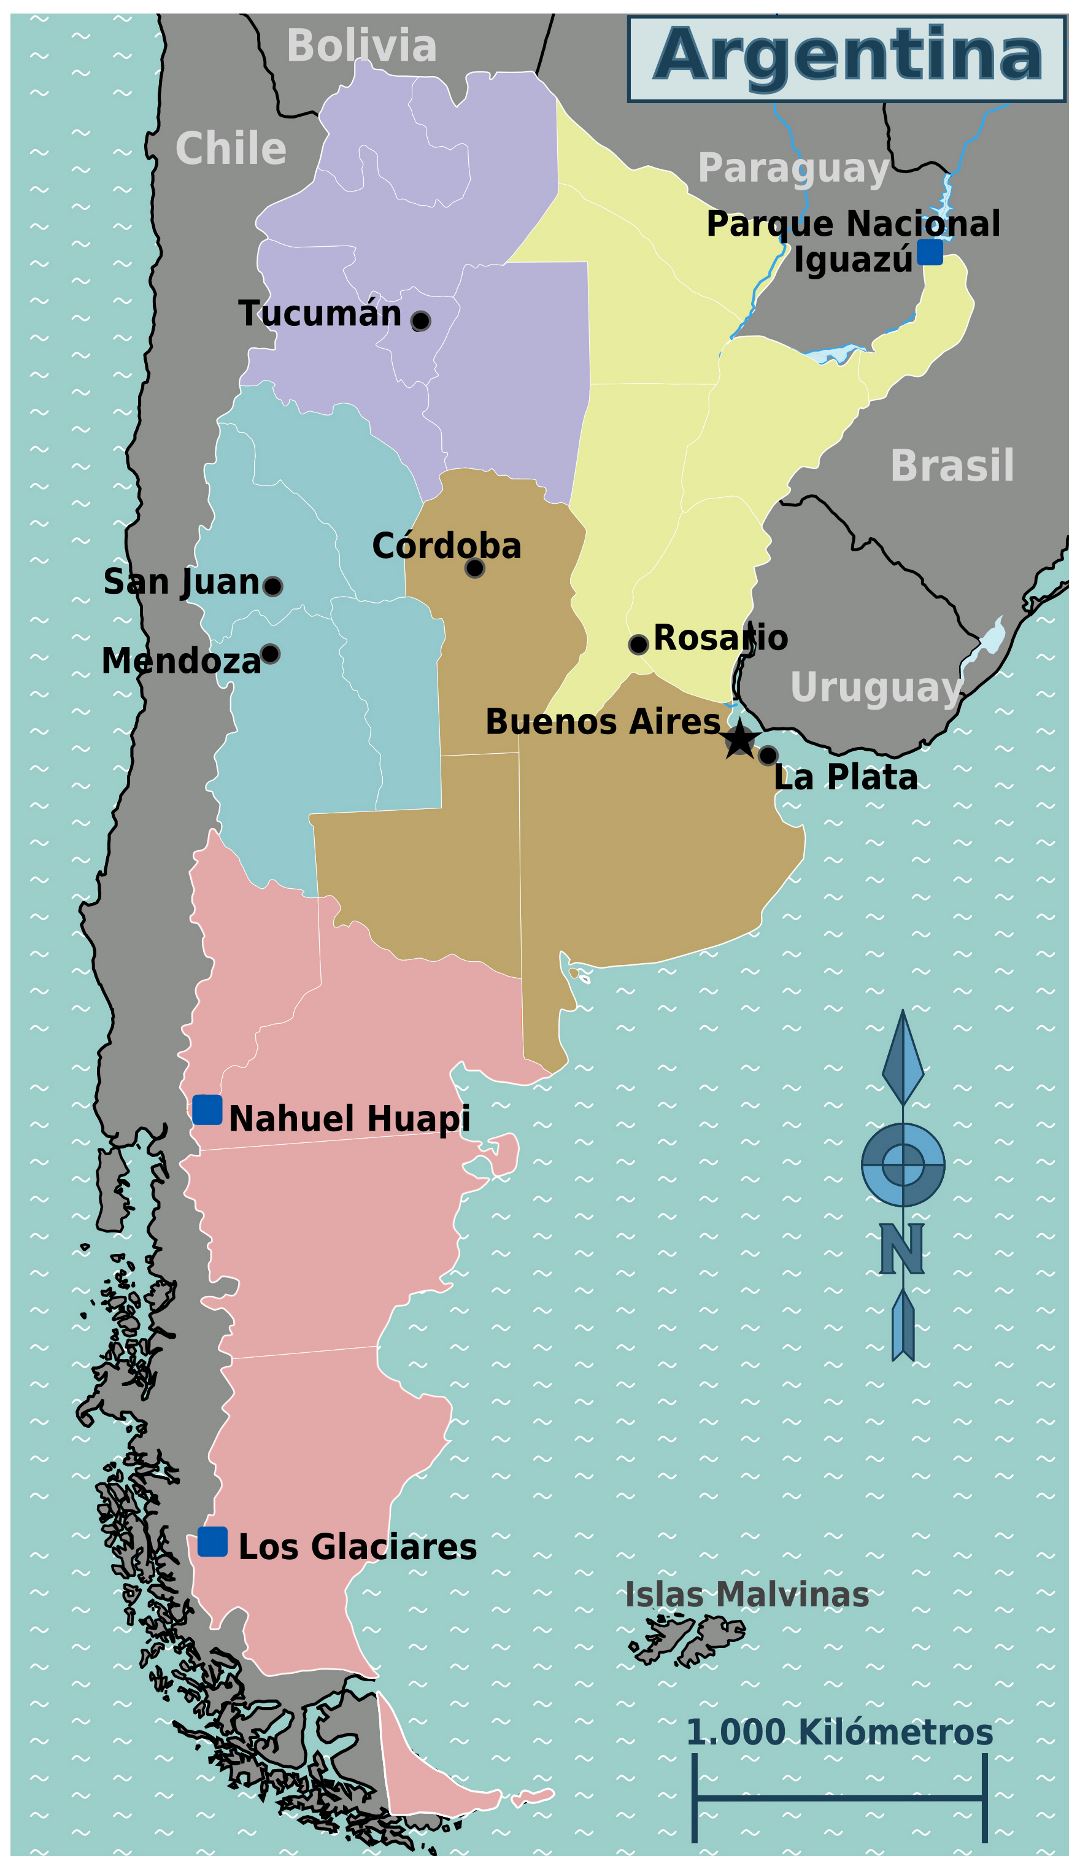 Large regions map of Argentina